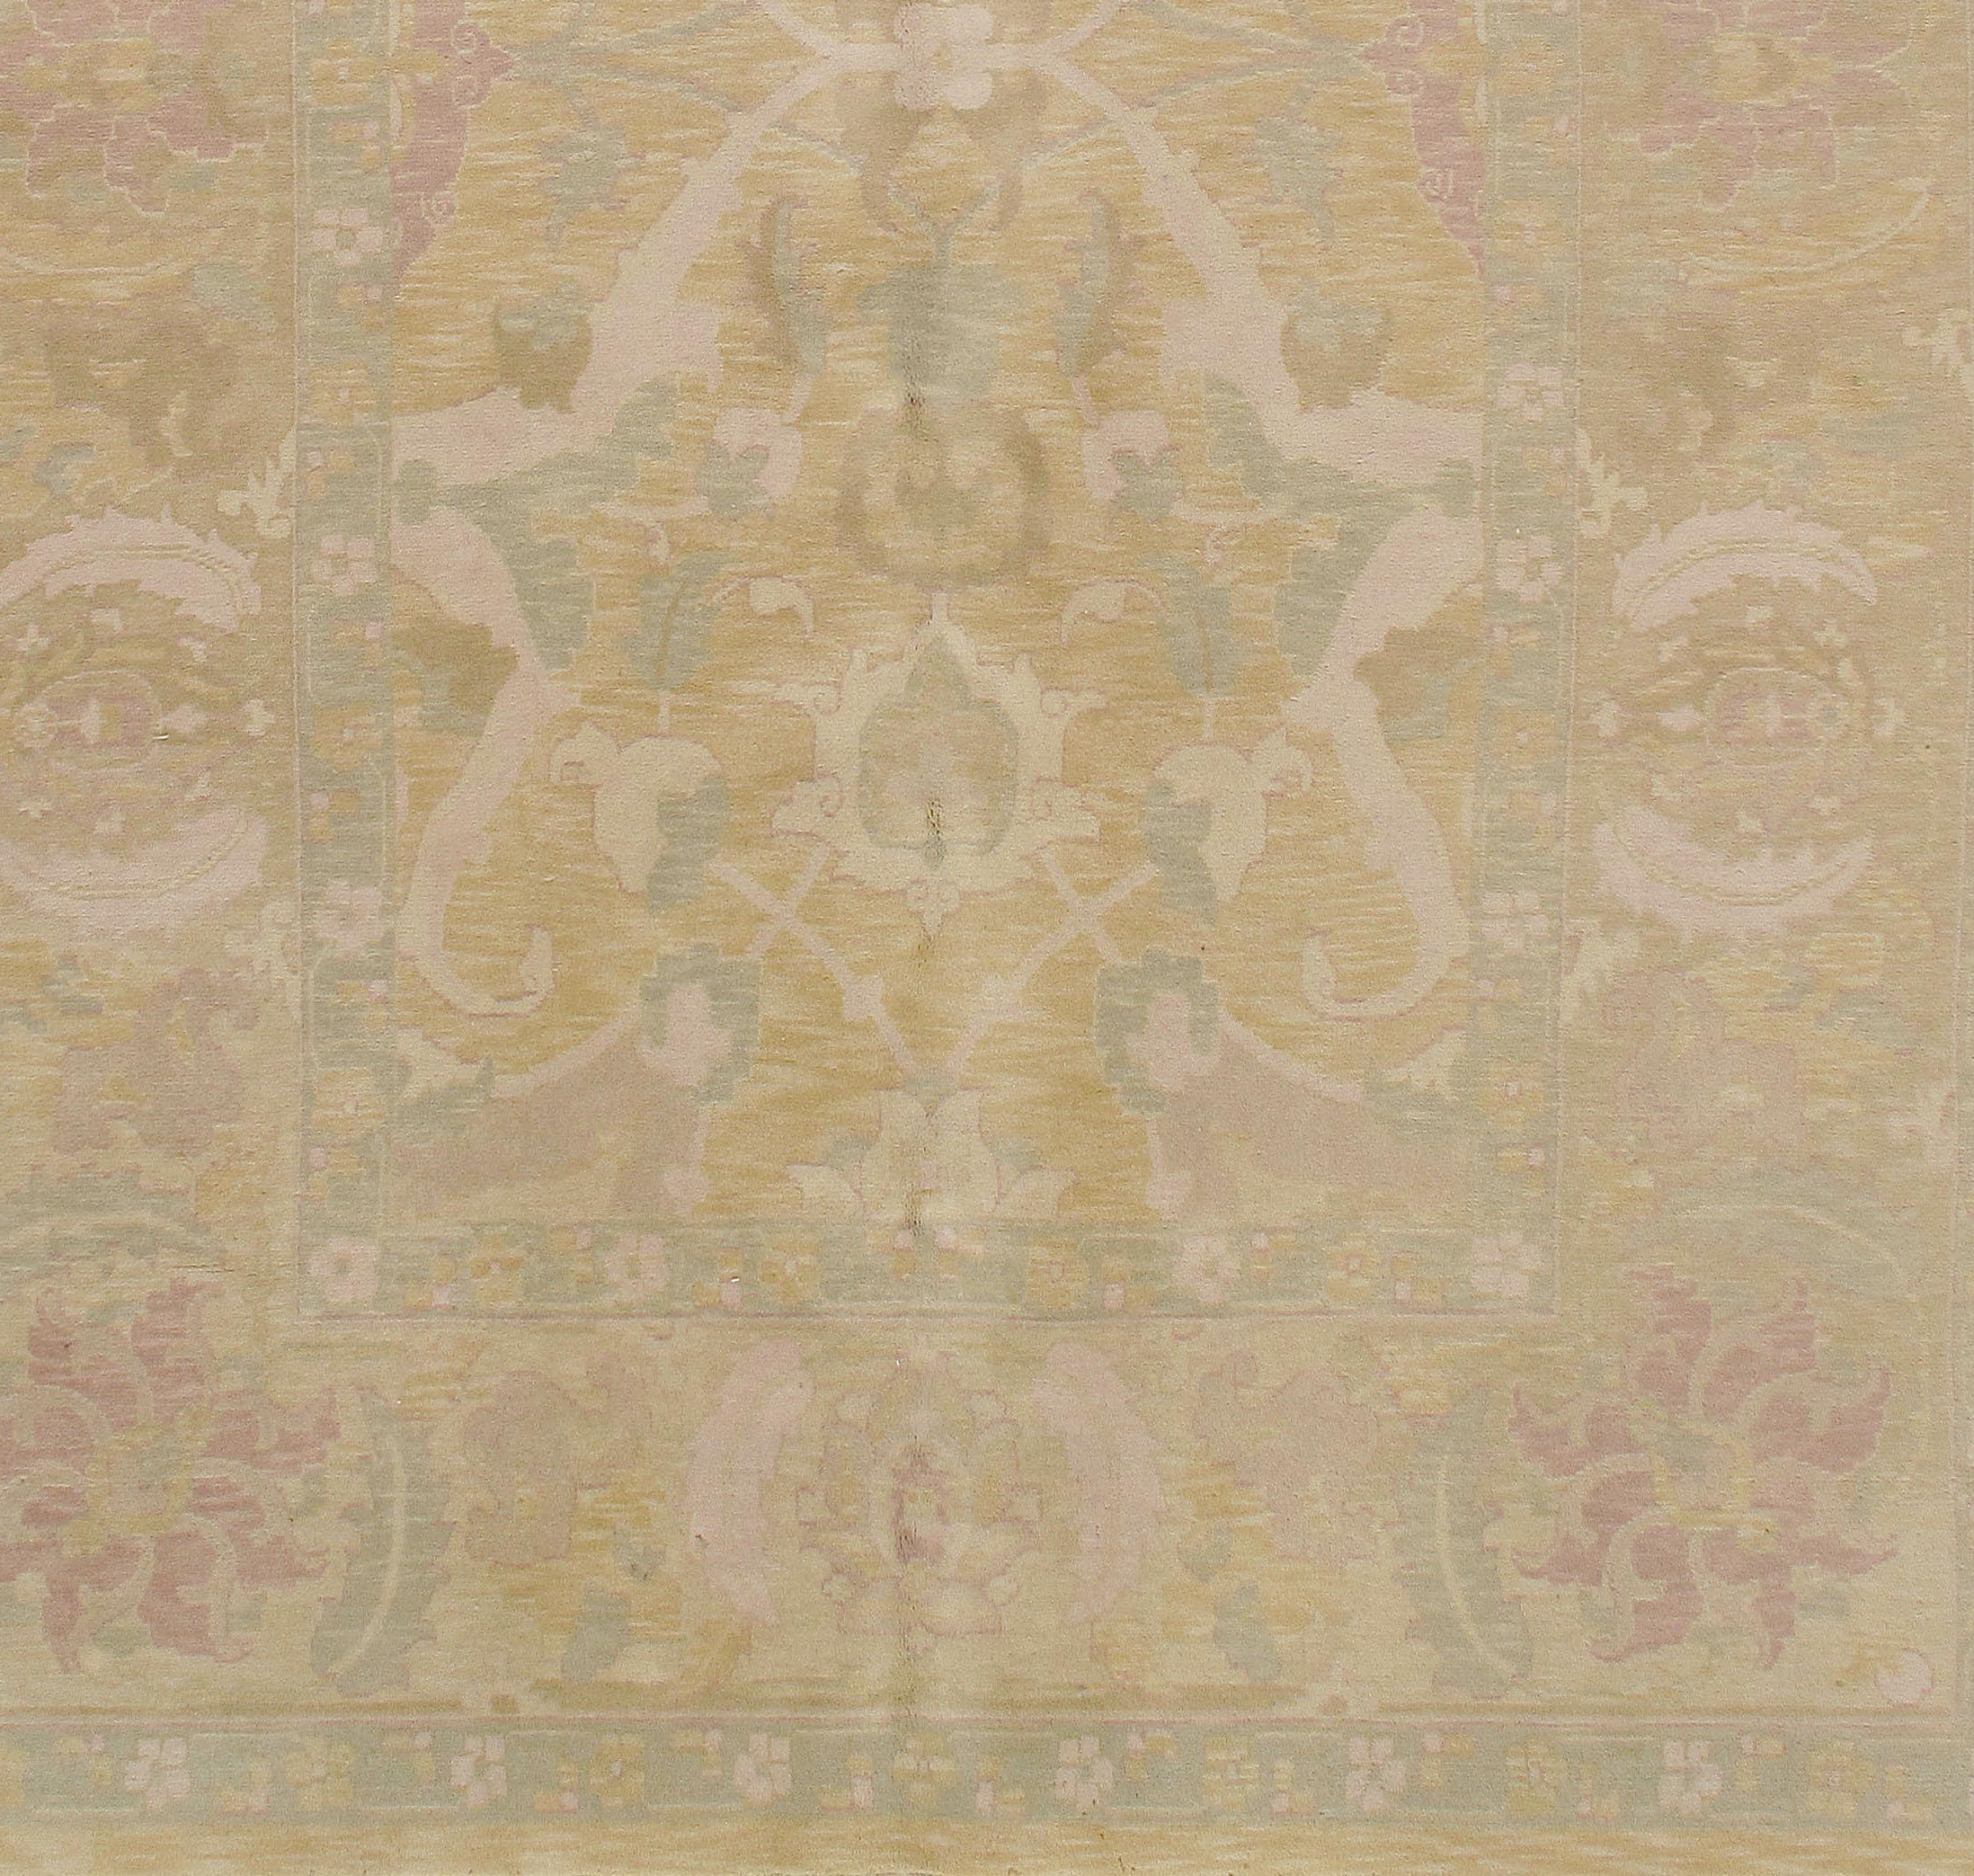 Wool Agra Design Rug 6'4 x 9'9 For Sale